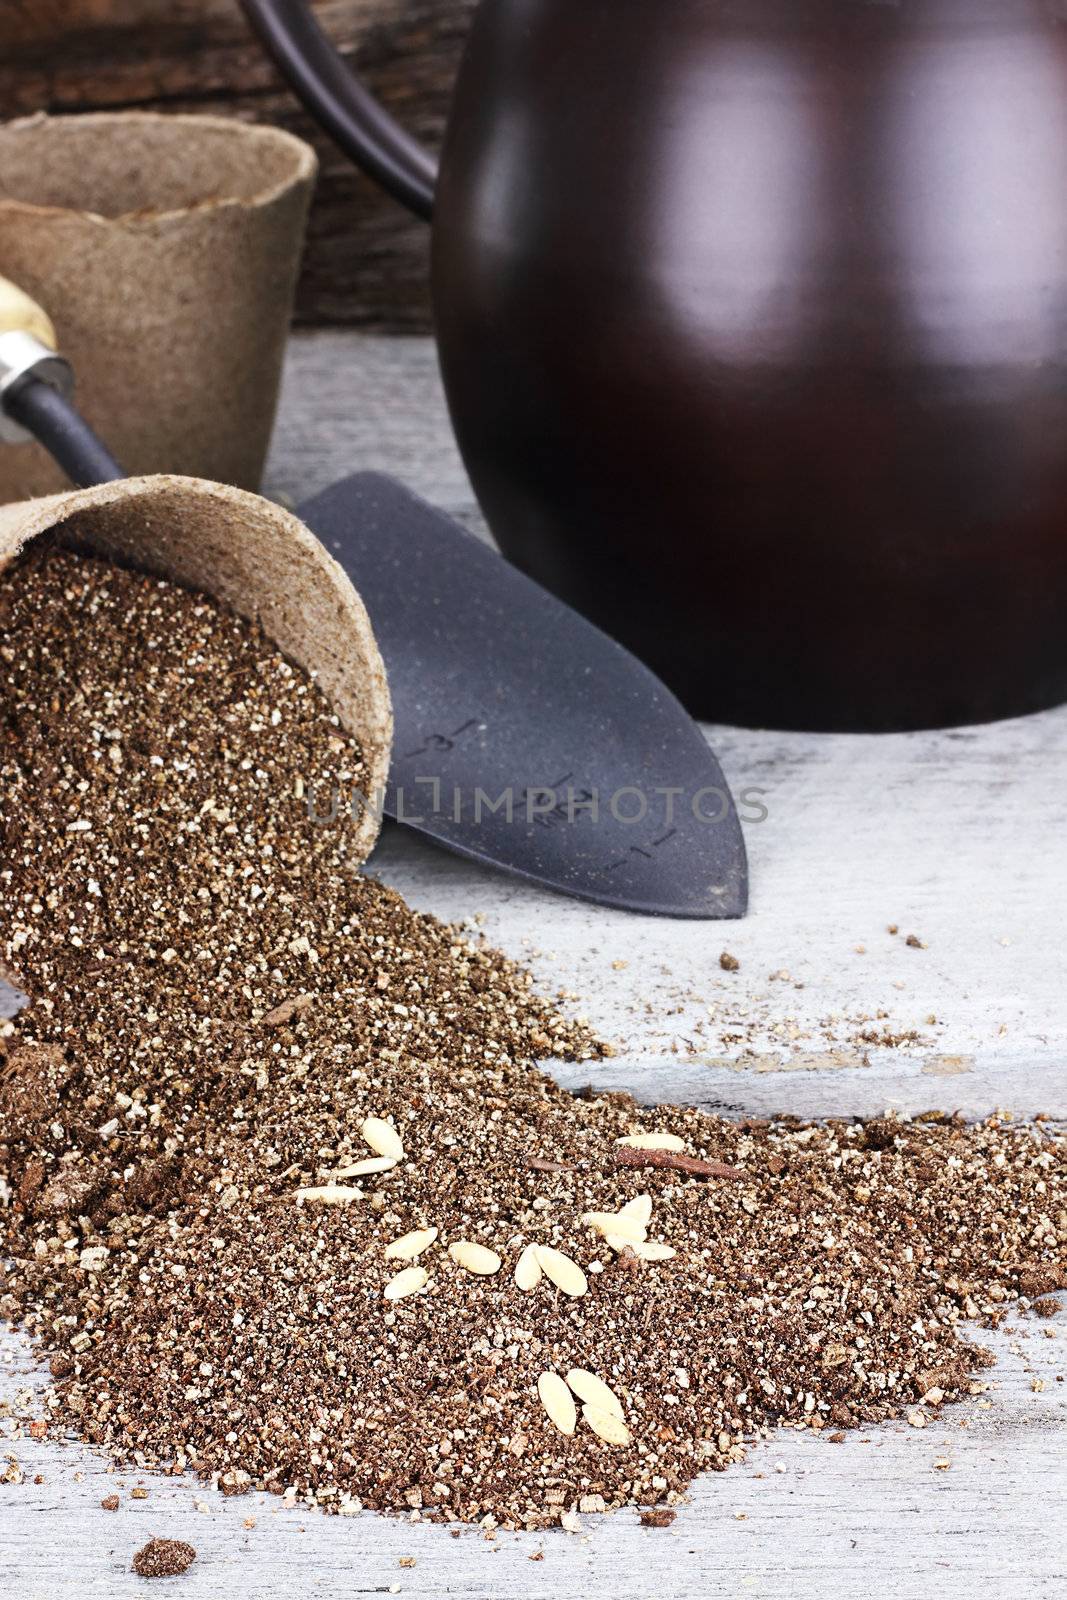 Seeds and potting soil spilling from a biodegradable peat pot with trowel and watering can in background. Shallow DOF with selective focus on seeds. 